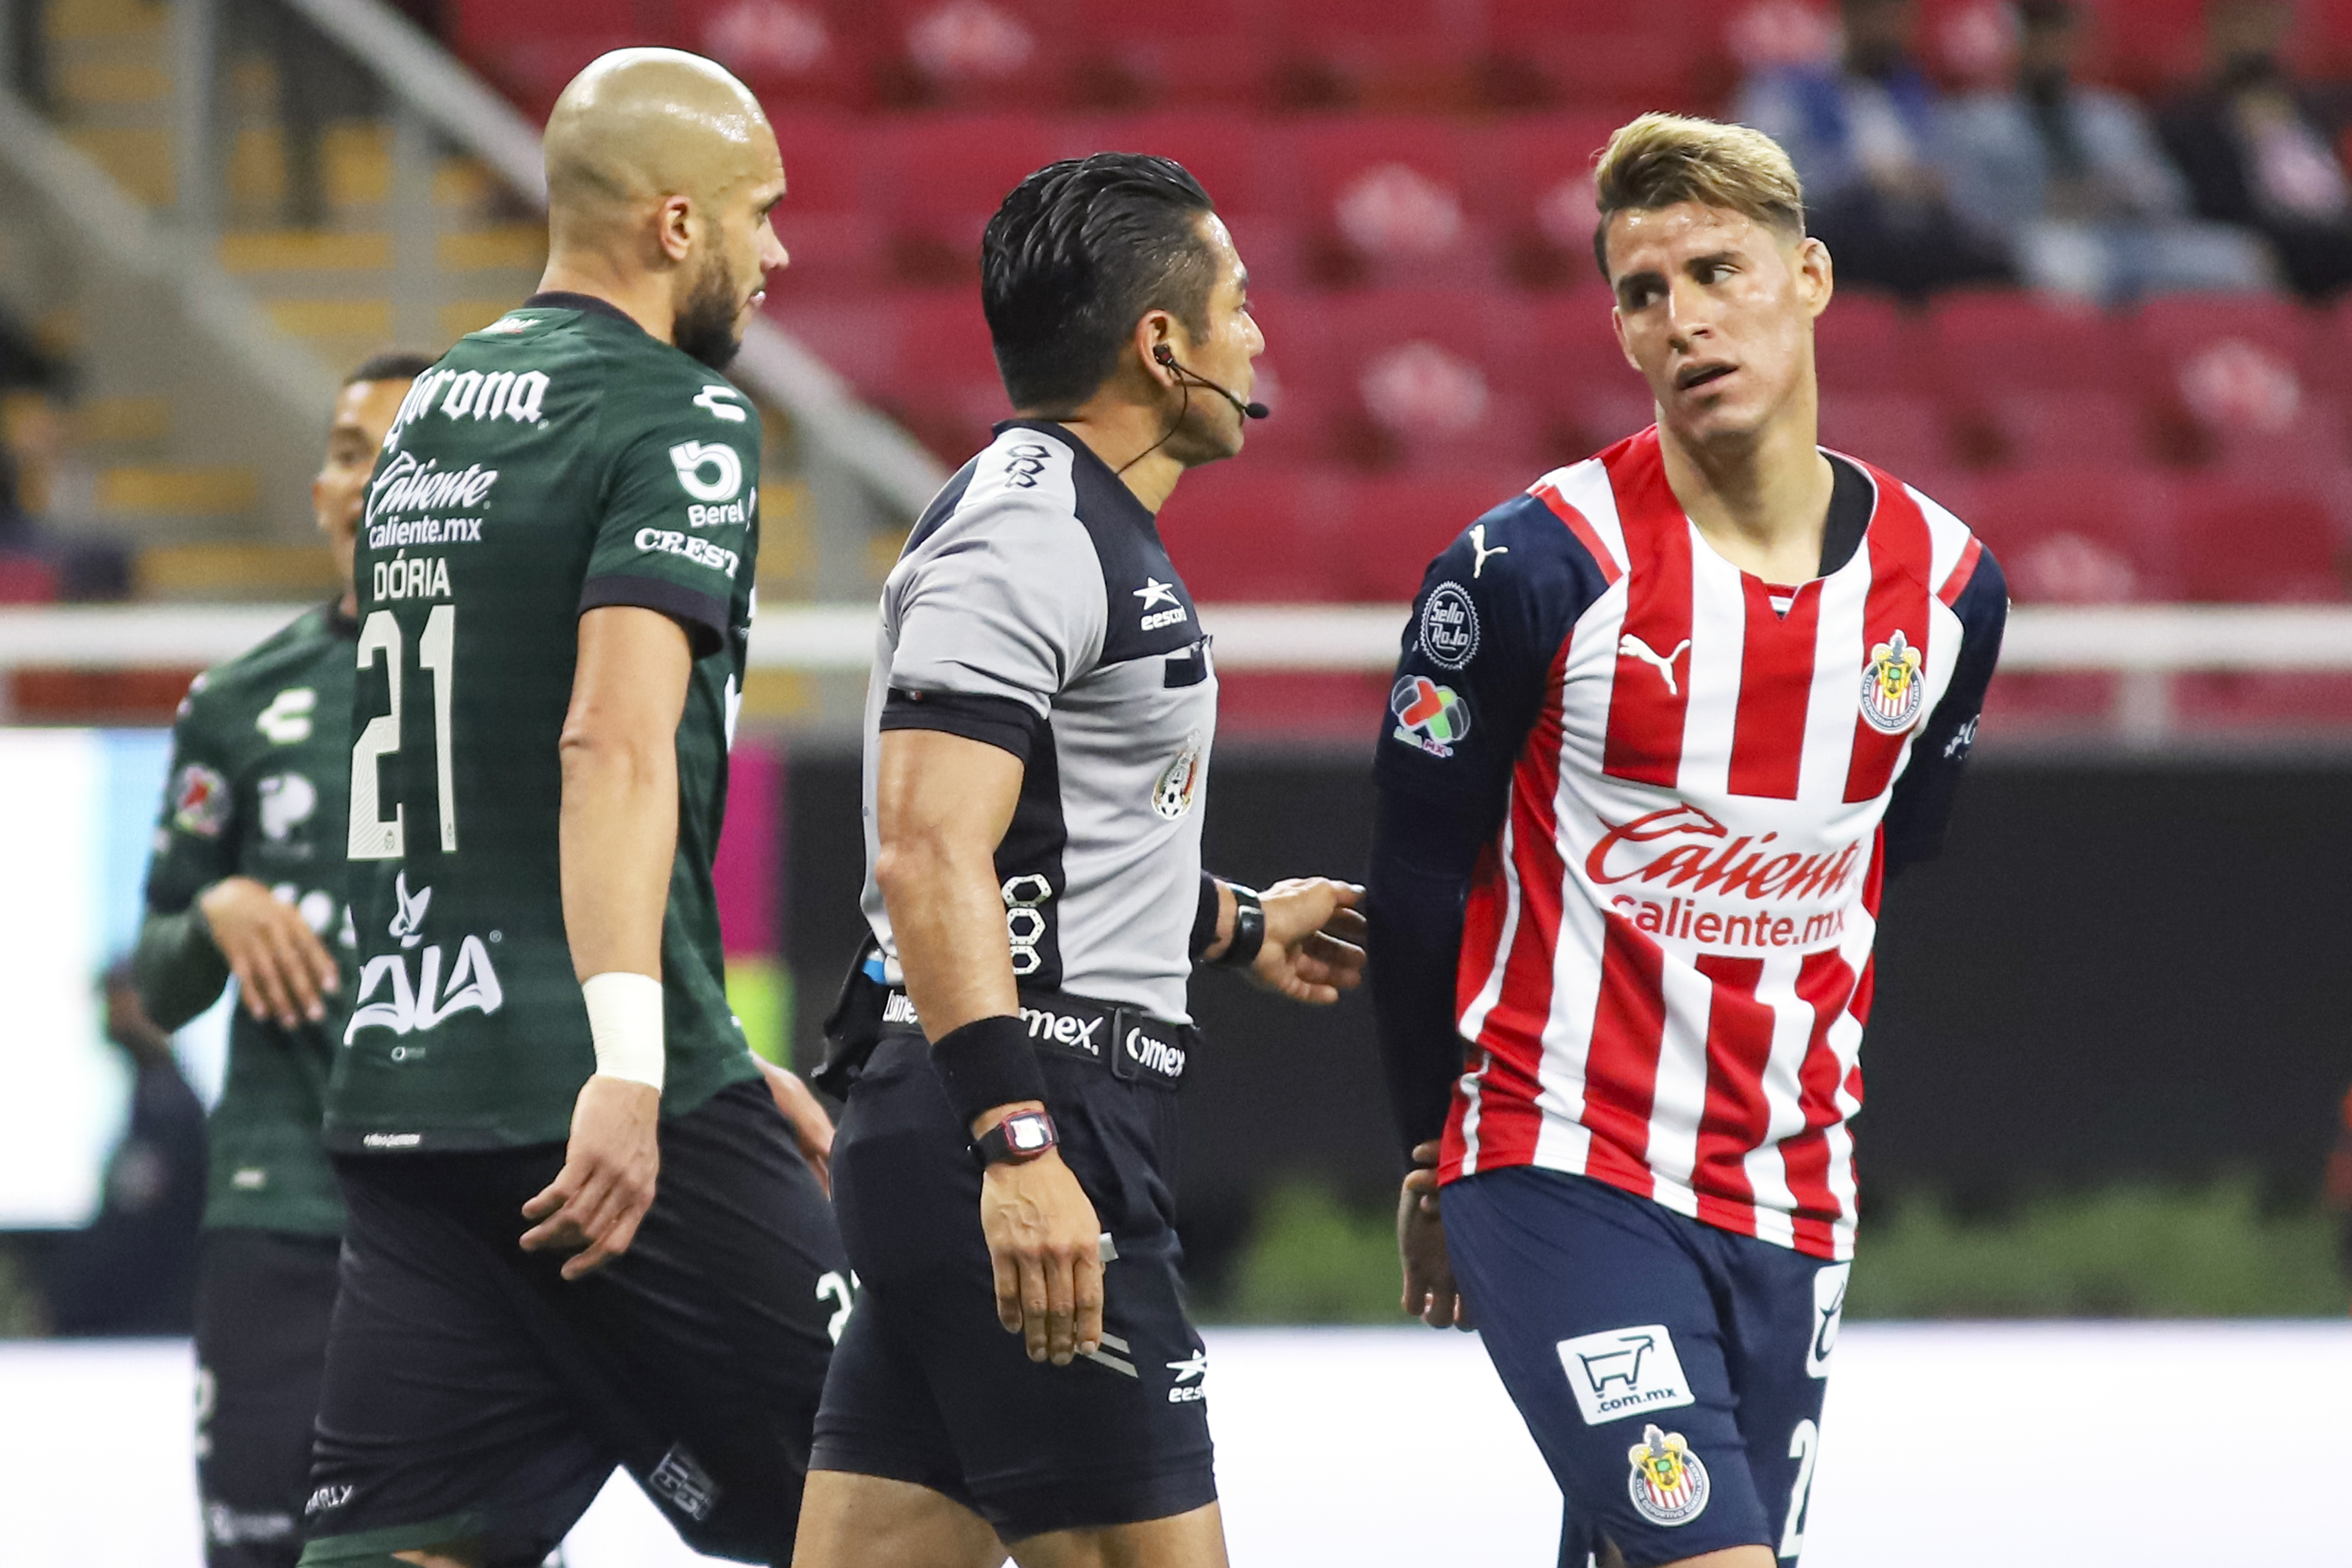 Cristian Calderon of Chivas appeals to central referee Victor Alfonso Caceres during the 9th round match between Chivas and Santos Laguna at Akron Stadium on March 5, 2022 in Zapopan, Mexico.